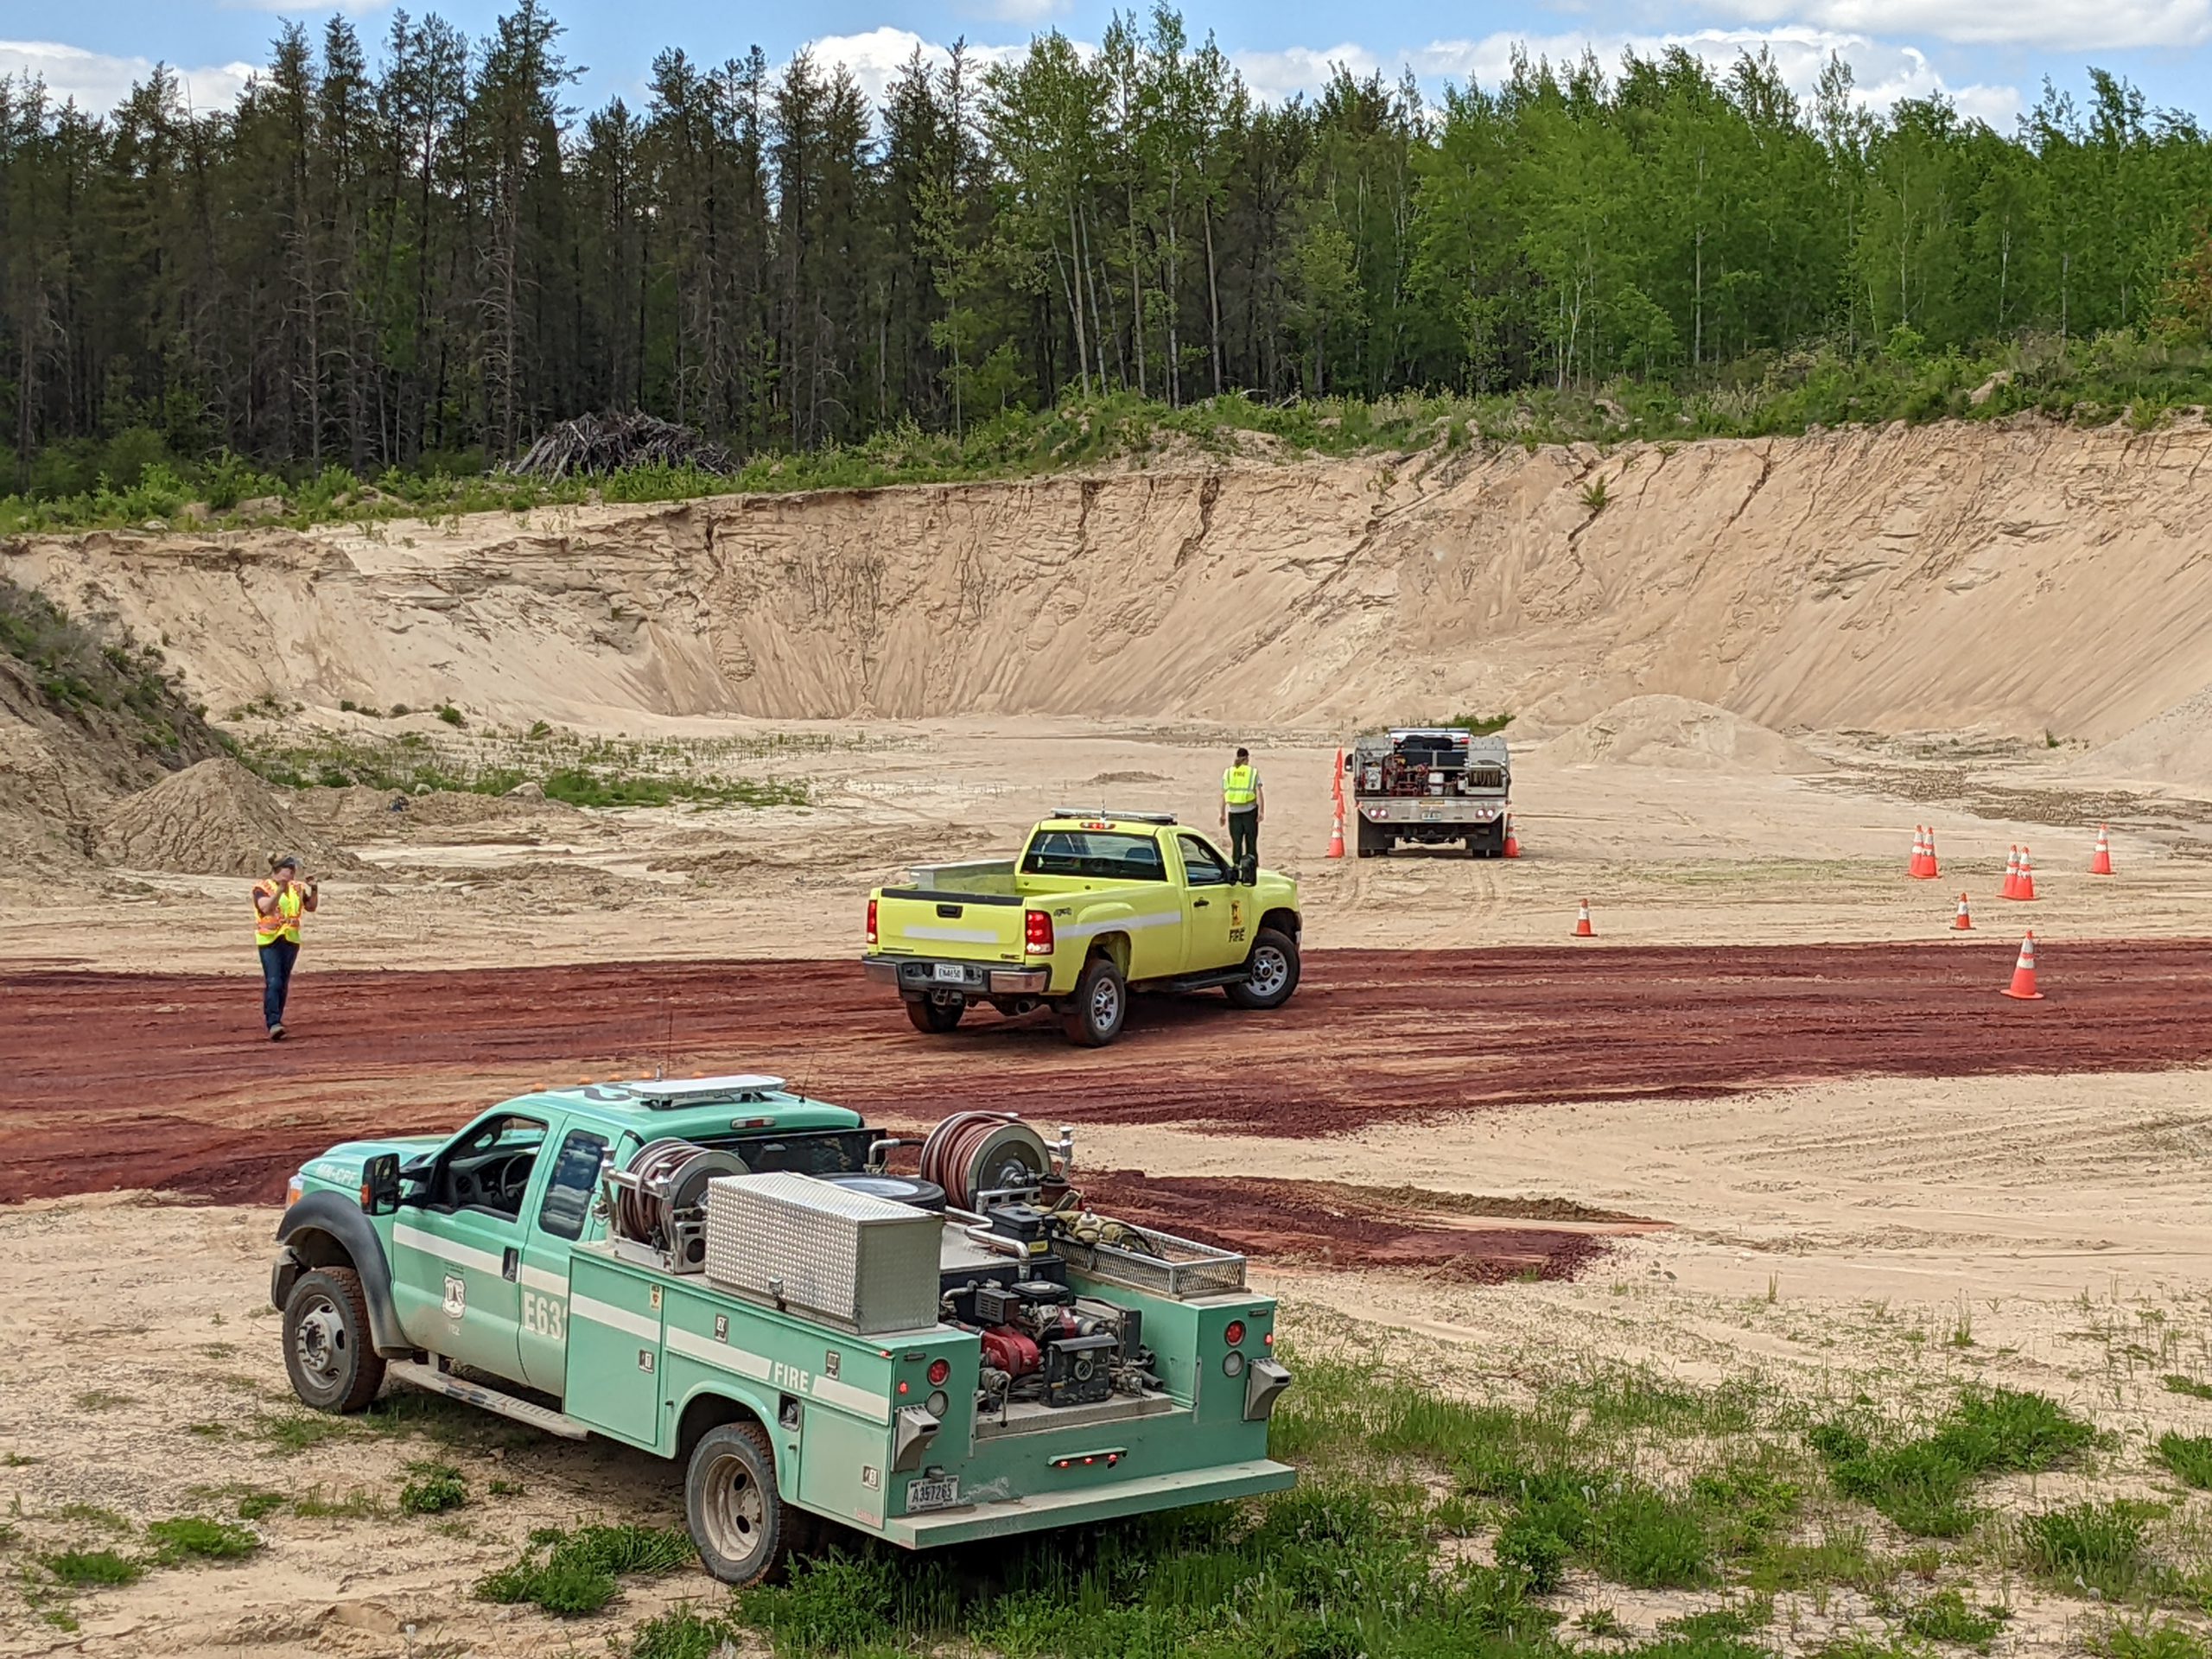 Green and yellow trucks in a gravel pit with people standing in the background.